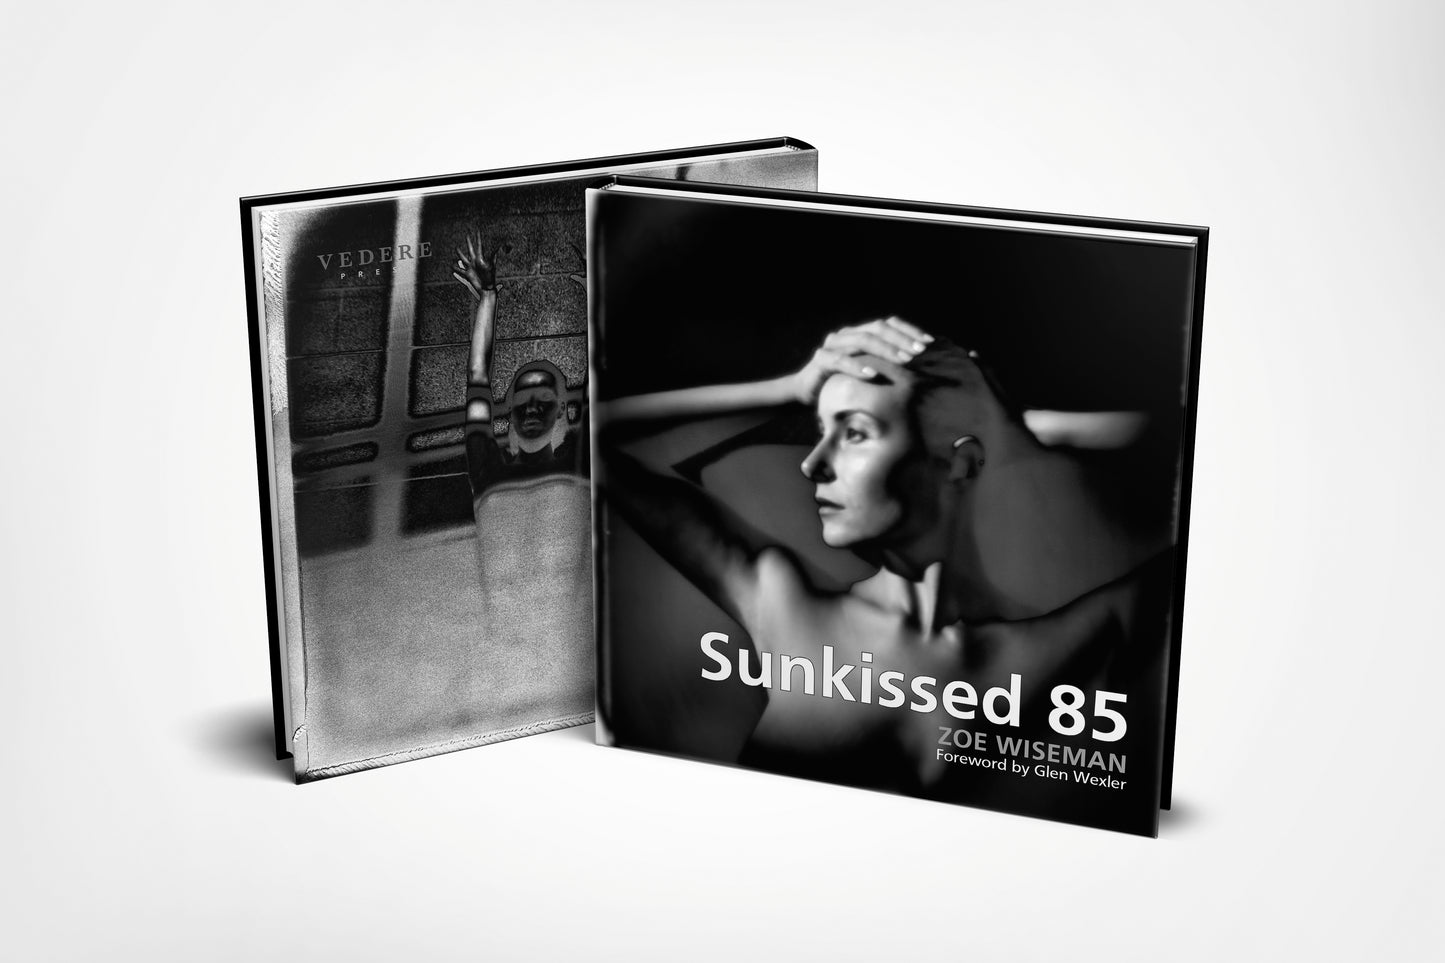 Sunkissed 85 by Zoe Wiseman